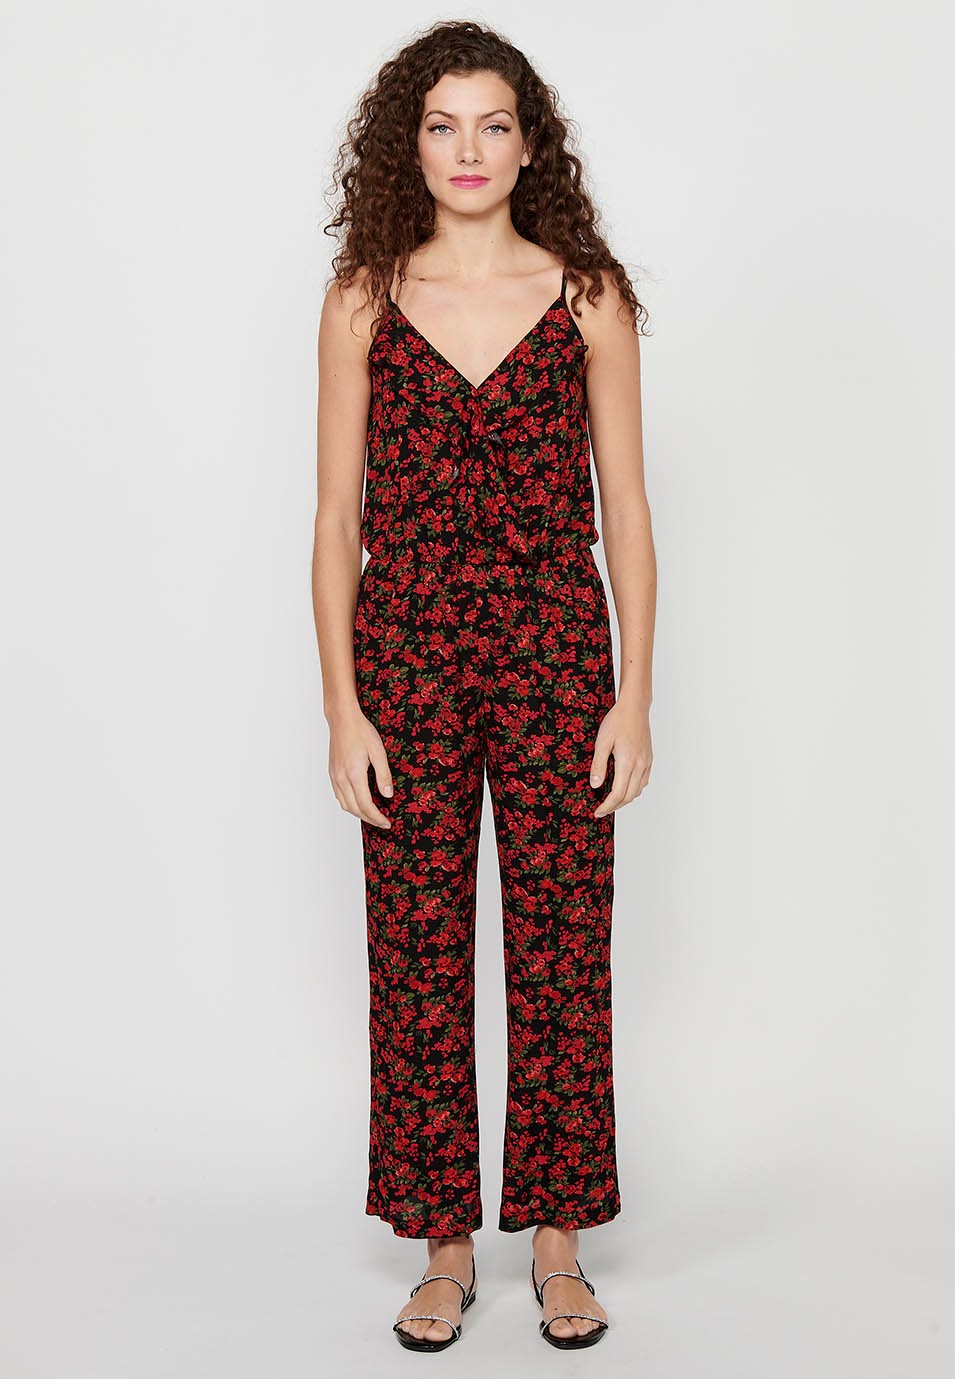 Long dress-trousers with adjustable straps with rubberized waist and red floral print for Women 3